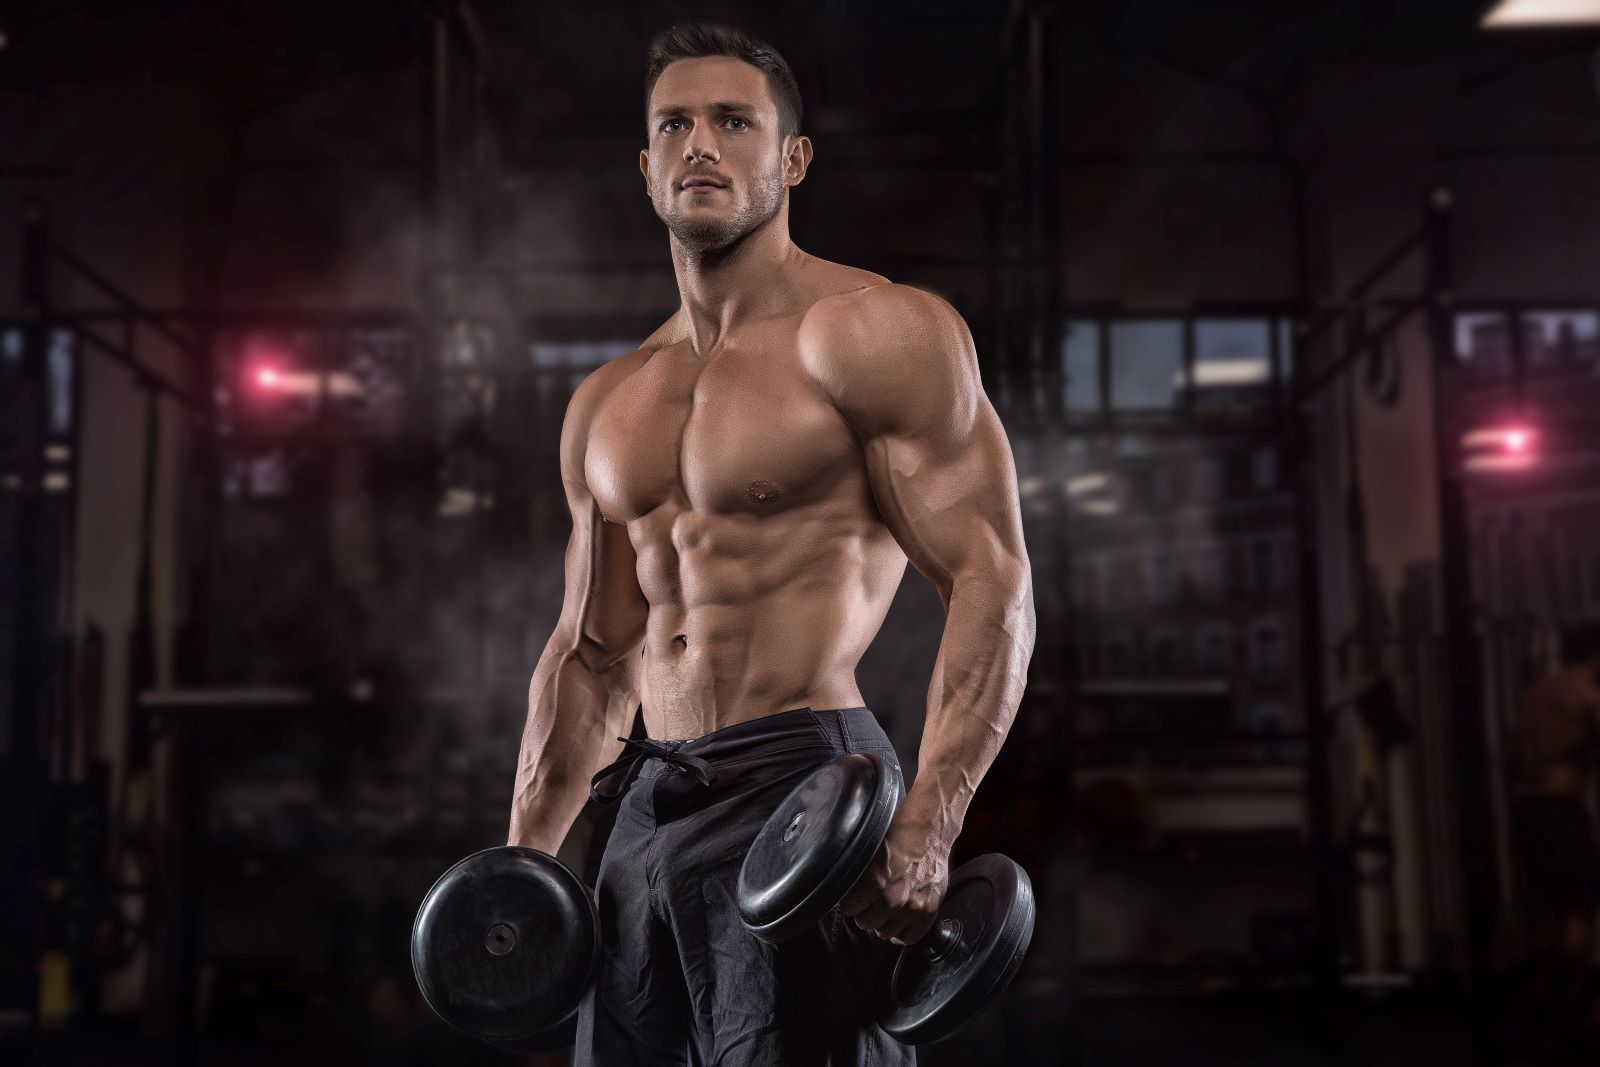 Looking To Build Muscle? Here's What To Focus On For The First 30 Days